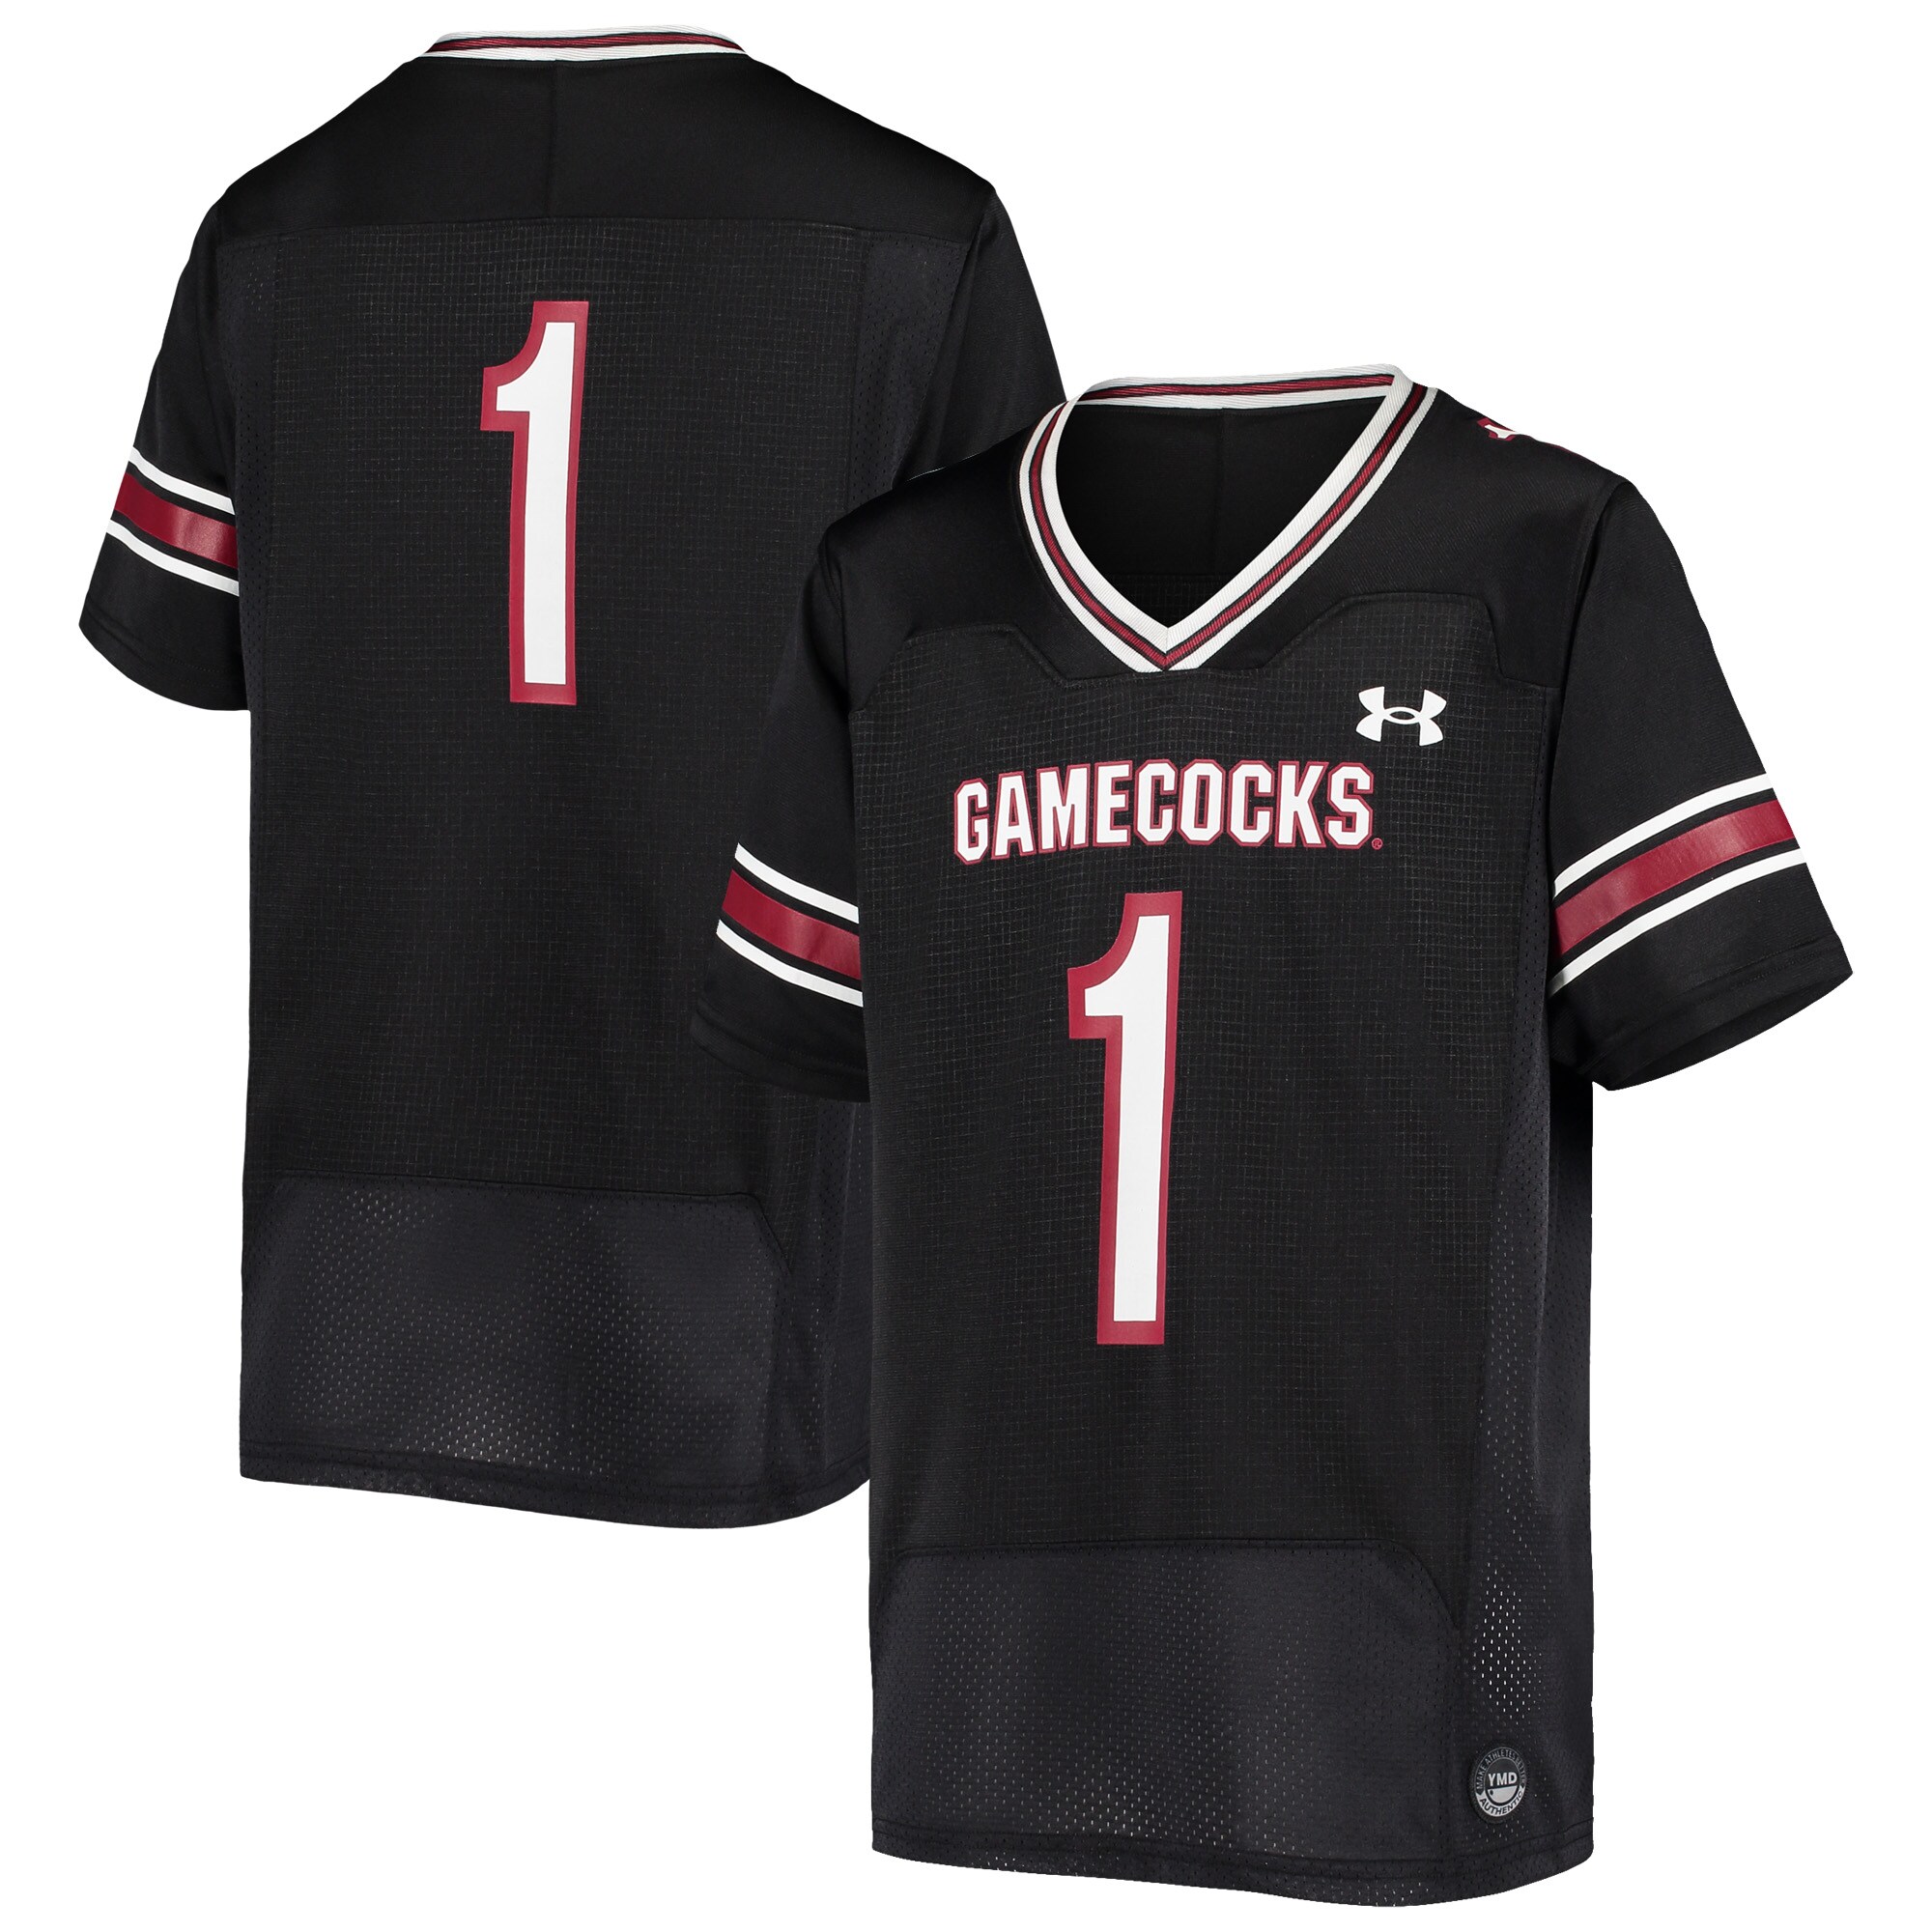 #1 South Carolina Gamecocks Under Armour Youth Replica  Football Shirts Jersey - Black For Youth Women Men